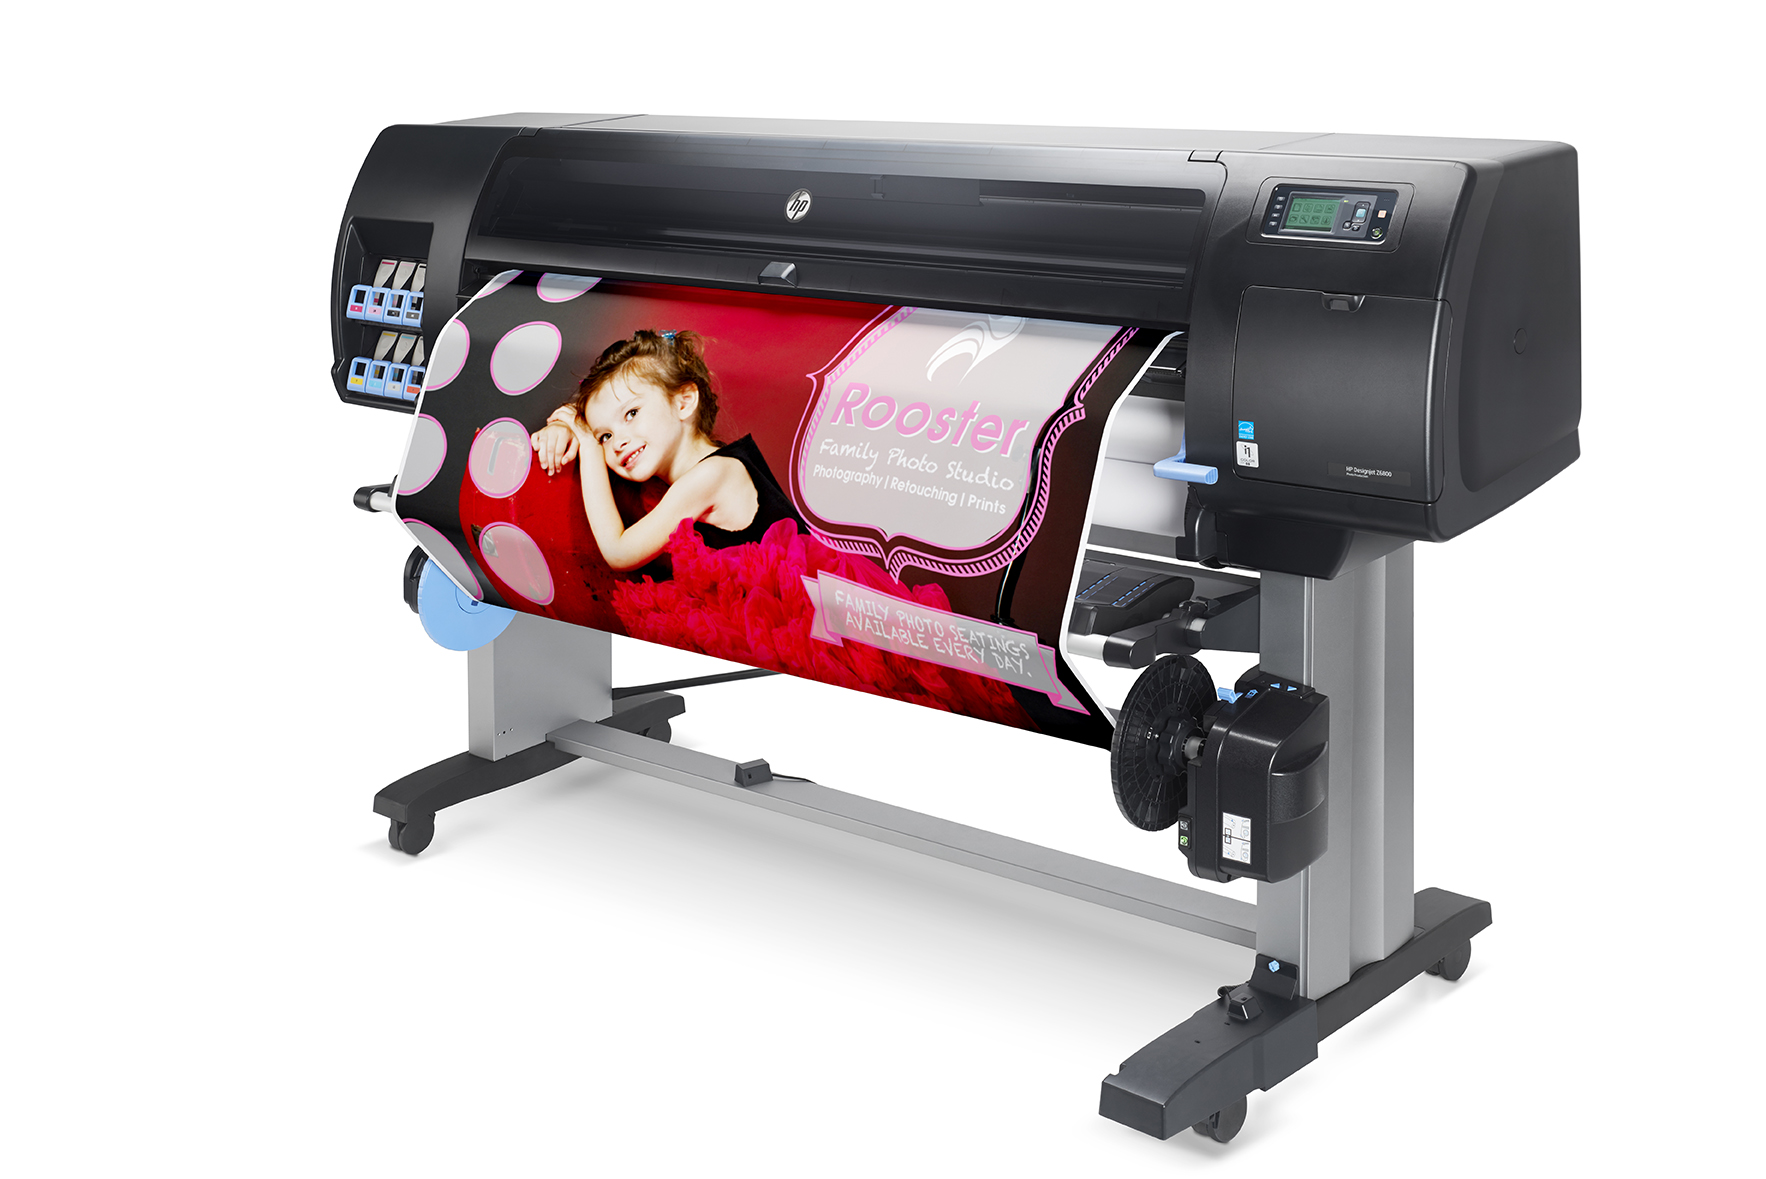 HP Designjet Z6800 right with output